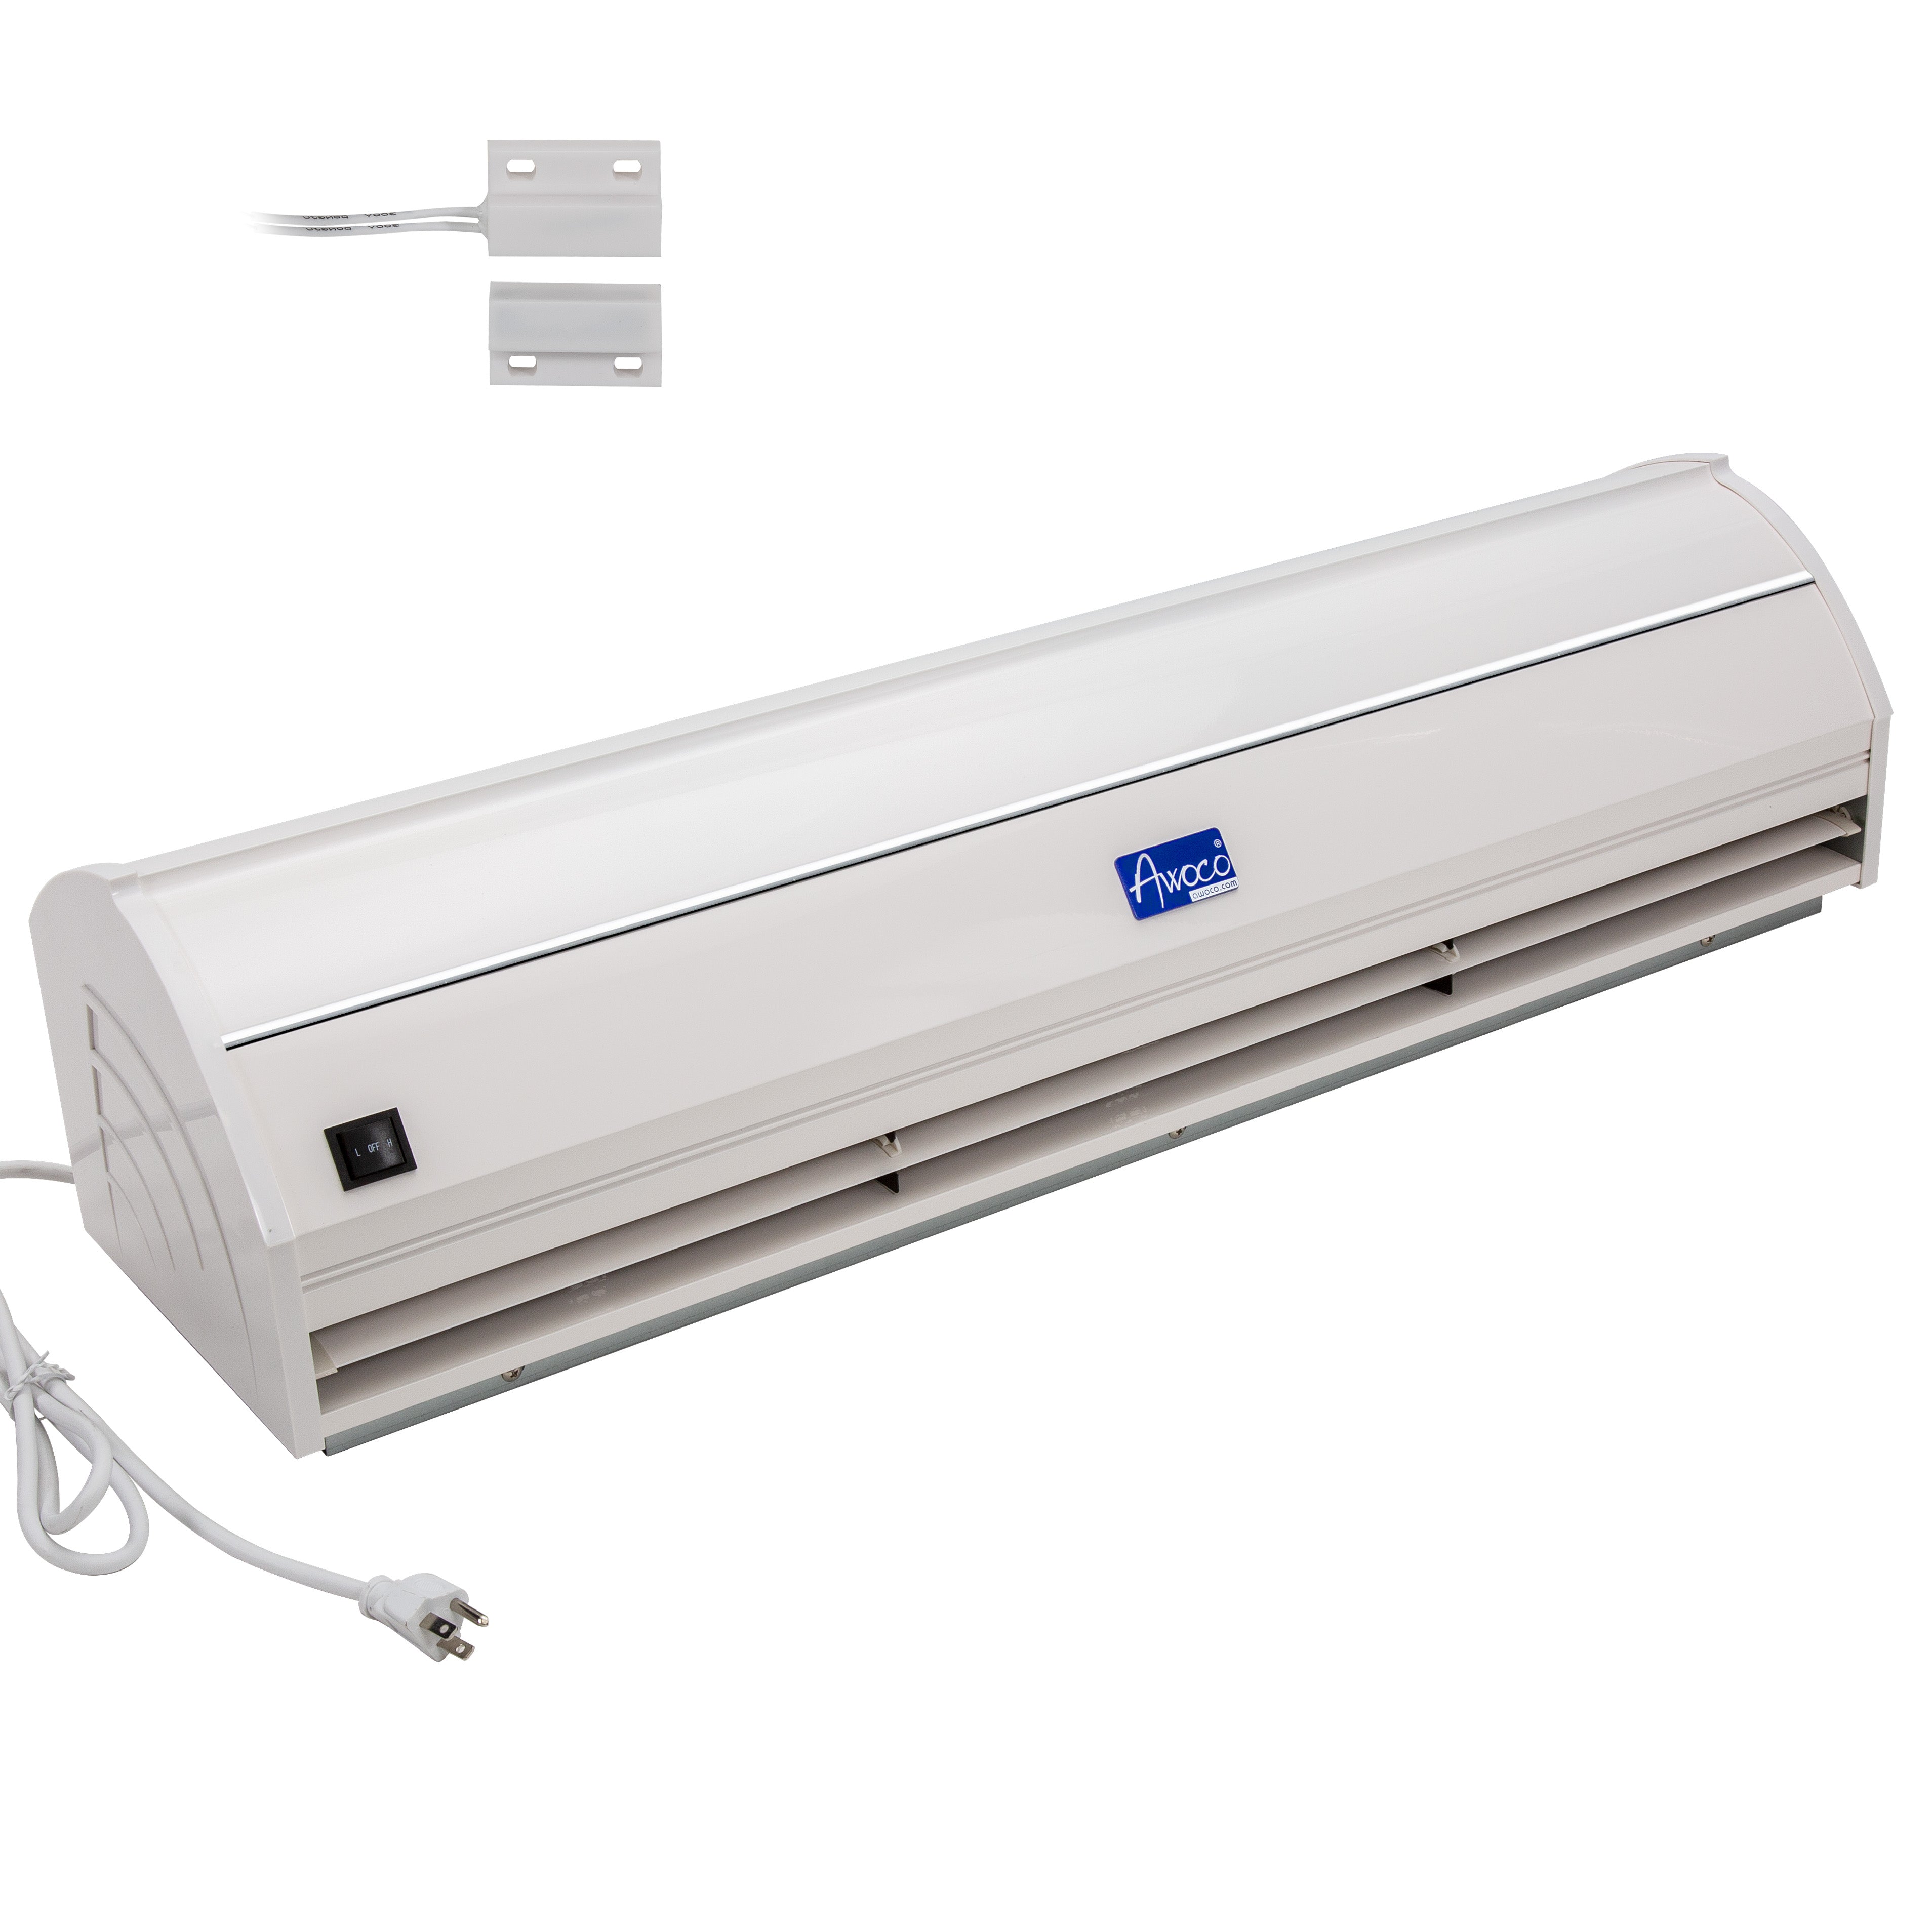 [Refurbished] Awoco AC21-K08 72" Elegant 2 Speeds 1800 CFM Indoor Air Curtain, CE Certified, 120V Unheated with an Easy-Install Magnetic Door Switch